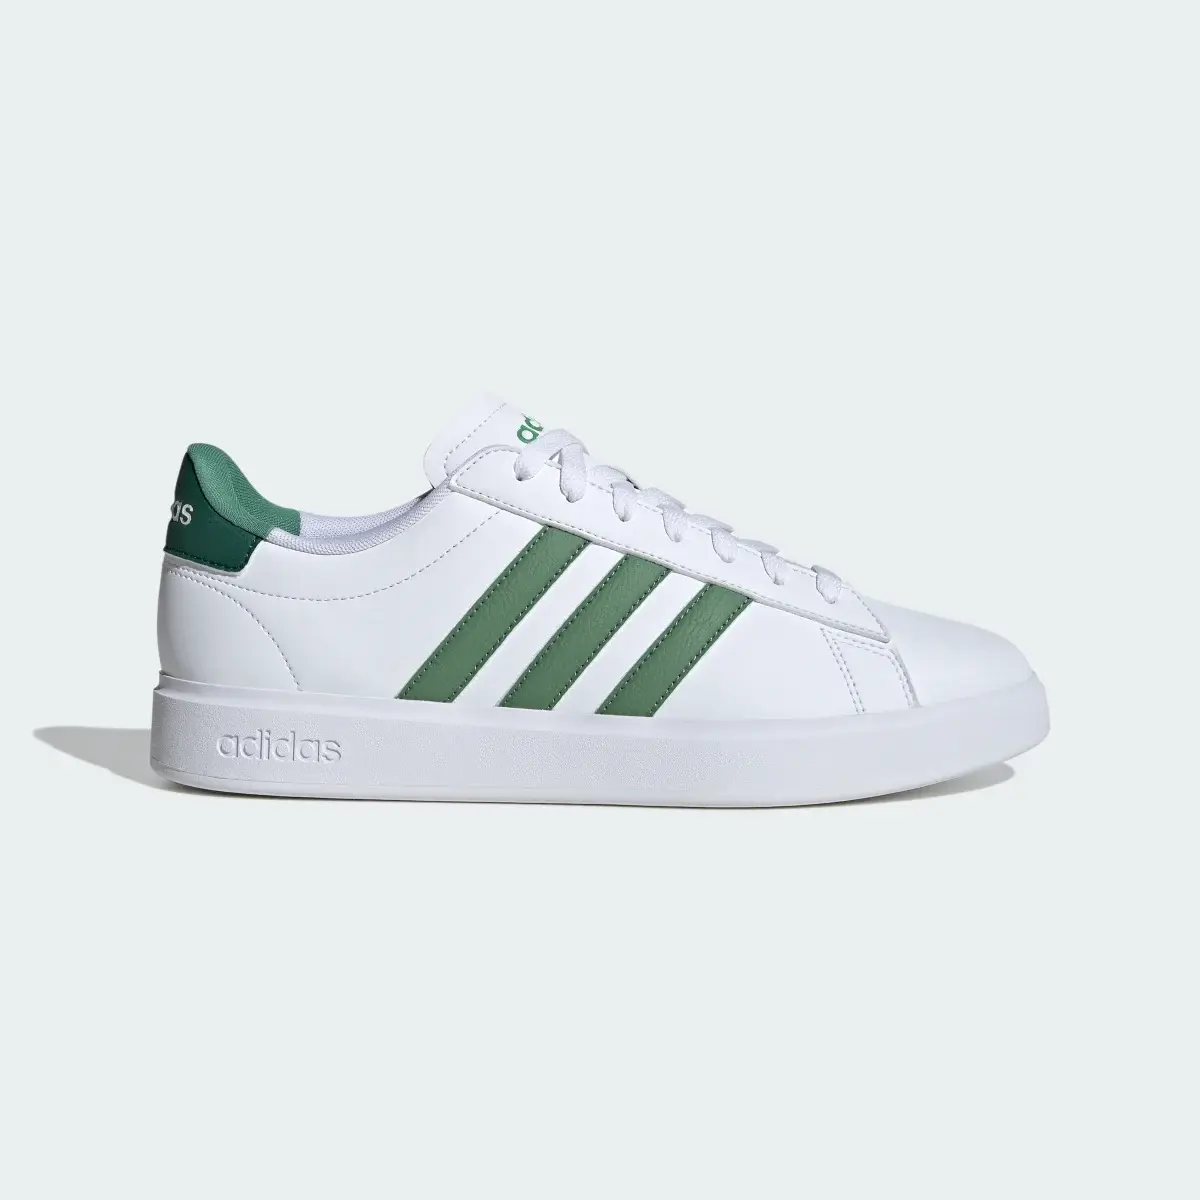 Adidas Grand Court 2.0 Shoes. 1